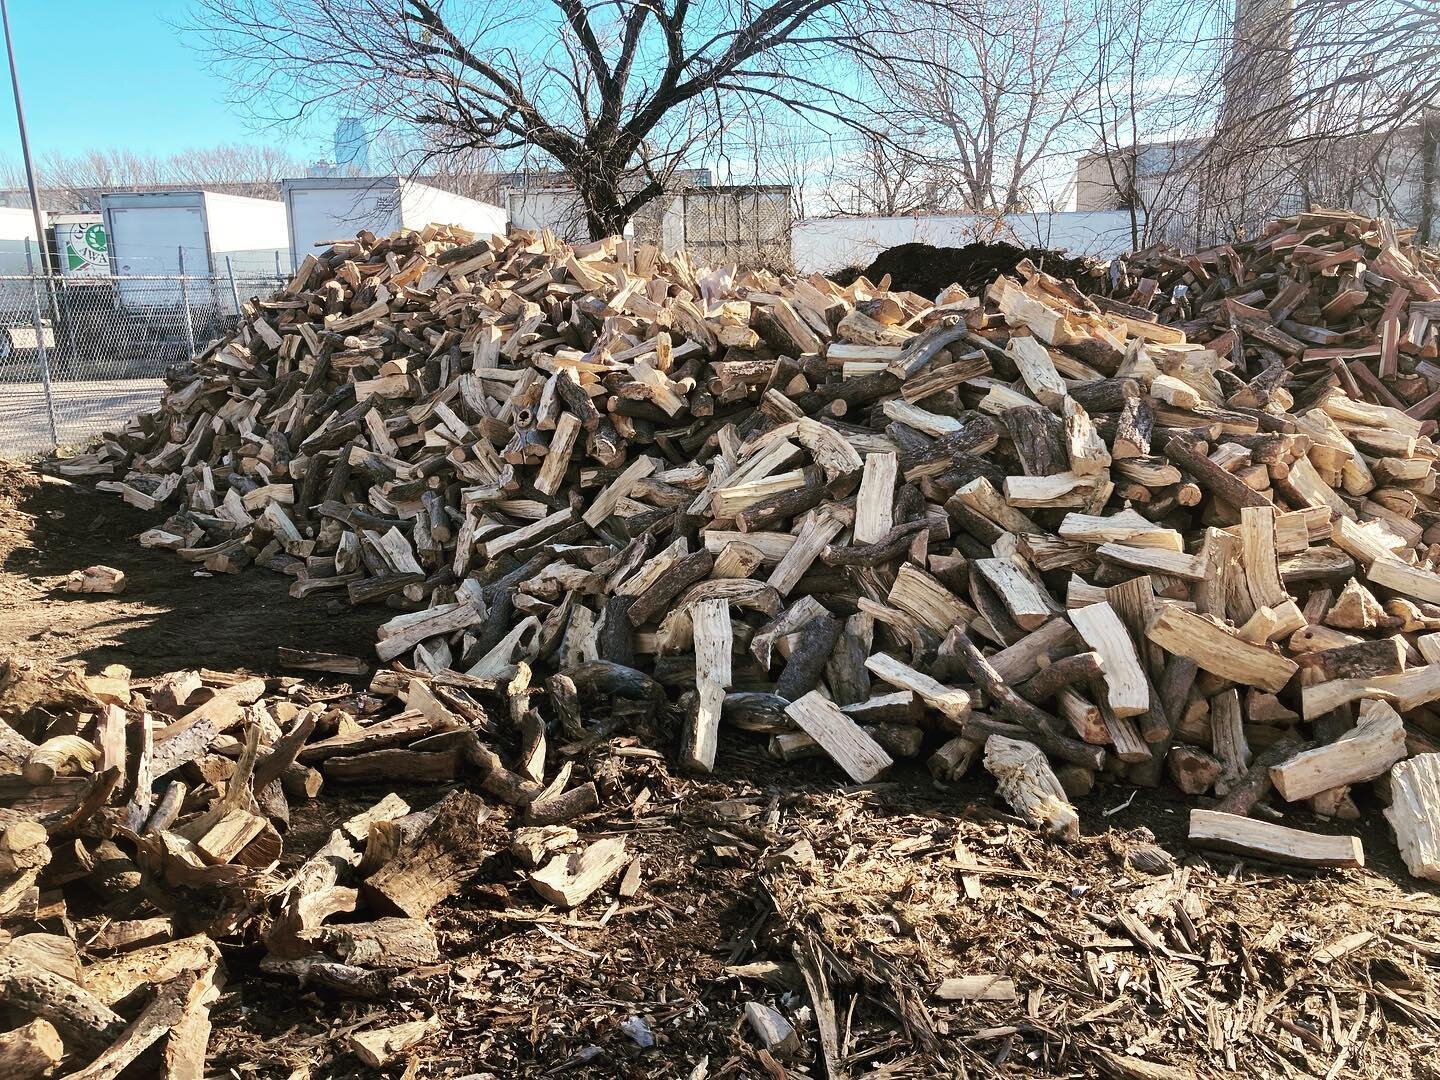 17.5 cords of Pi&ntilde;on Firewood from New Mexico, Half is spoken for&hellip;reach out. #coldfront #firewood #dallas